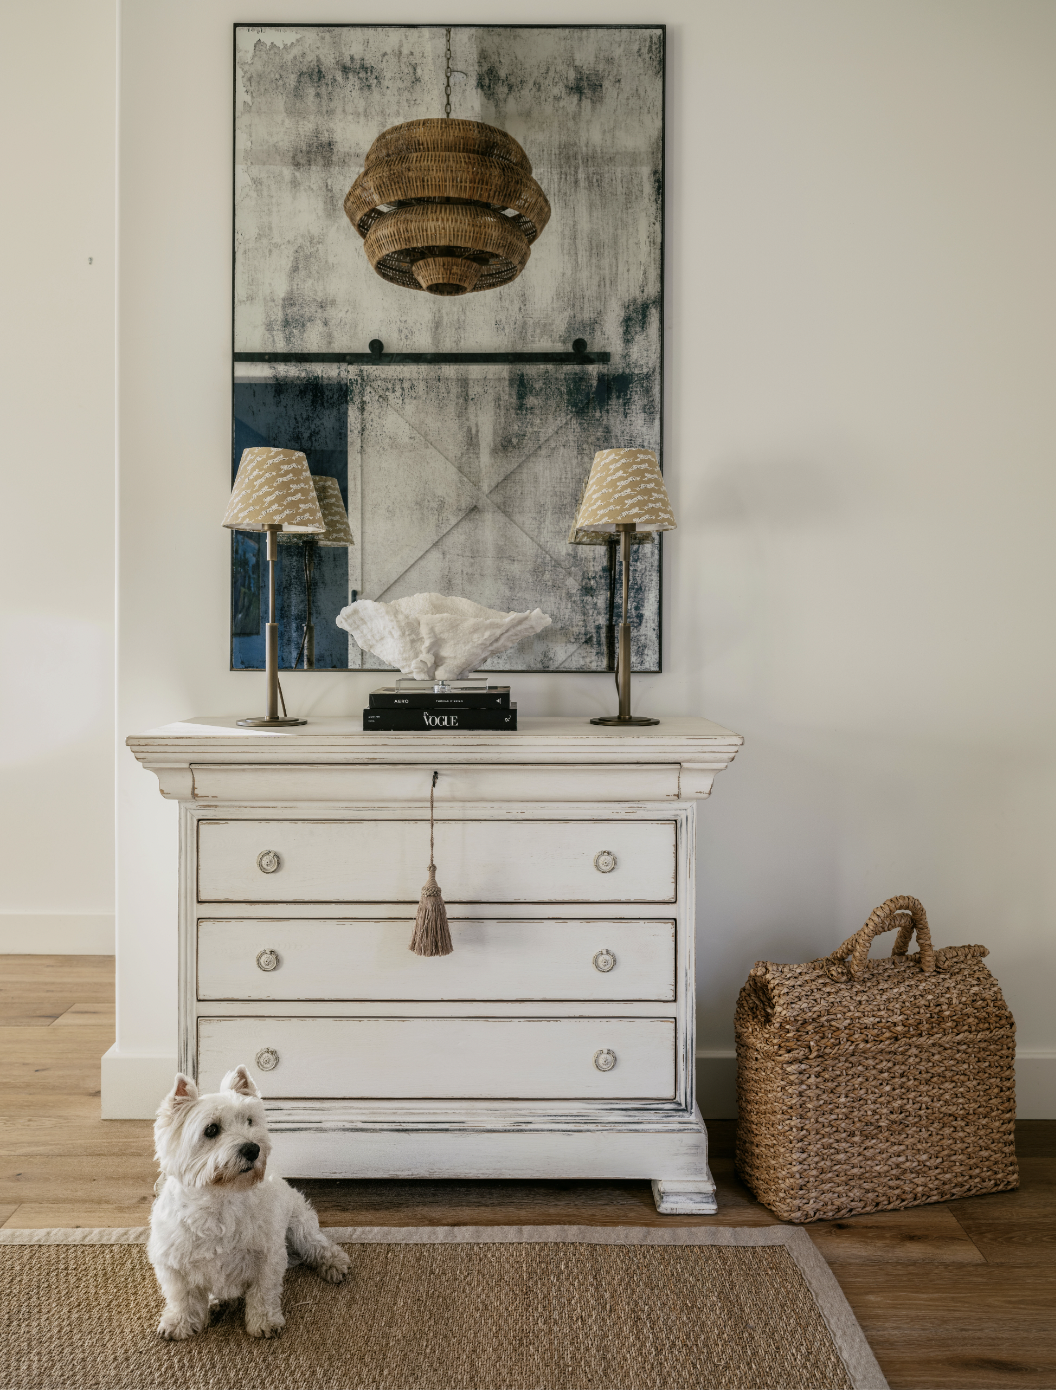  An antique white dresser with a large art piece hung above it. A small white Westie sits in front of the dresser.  